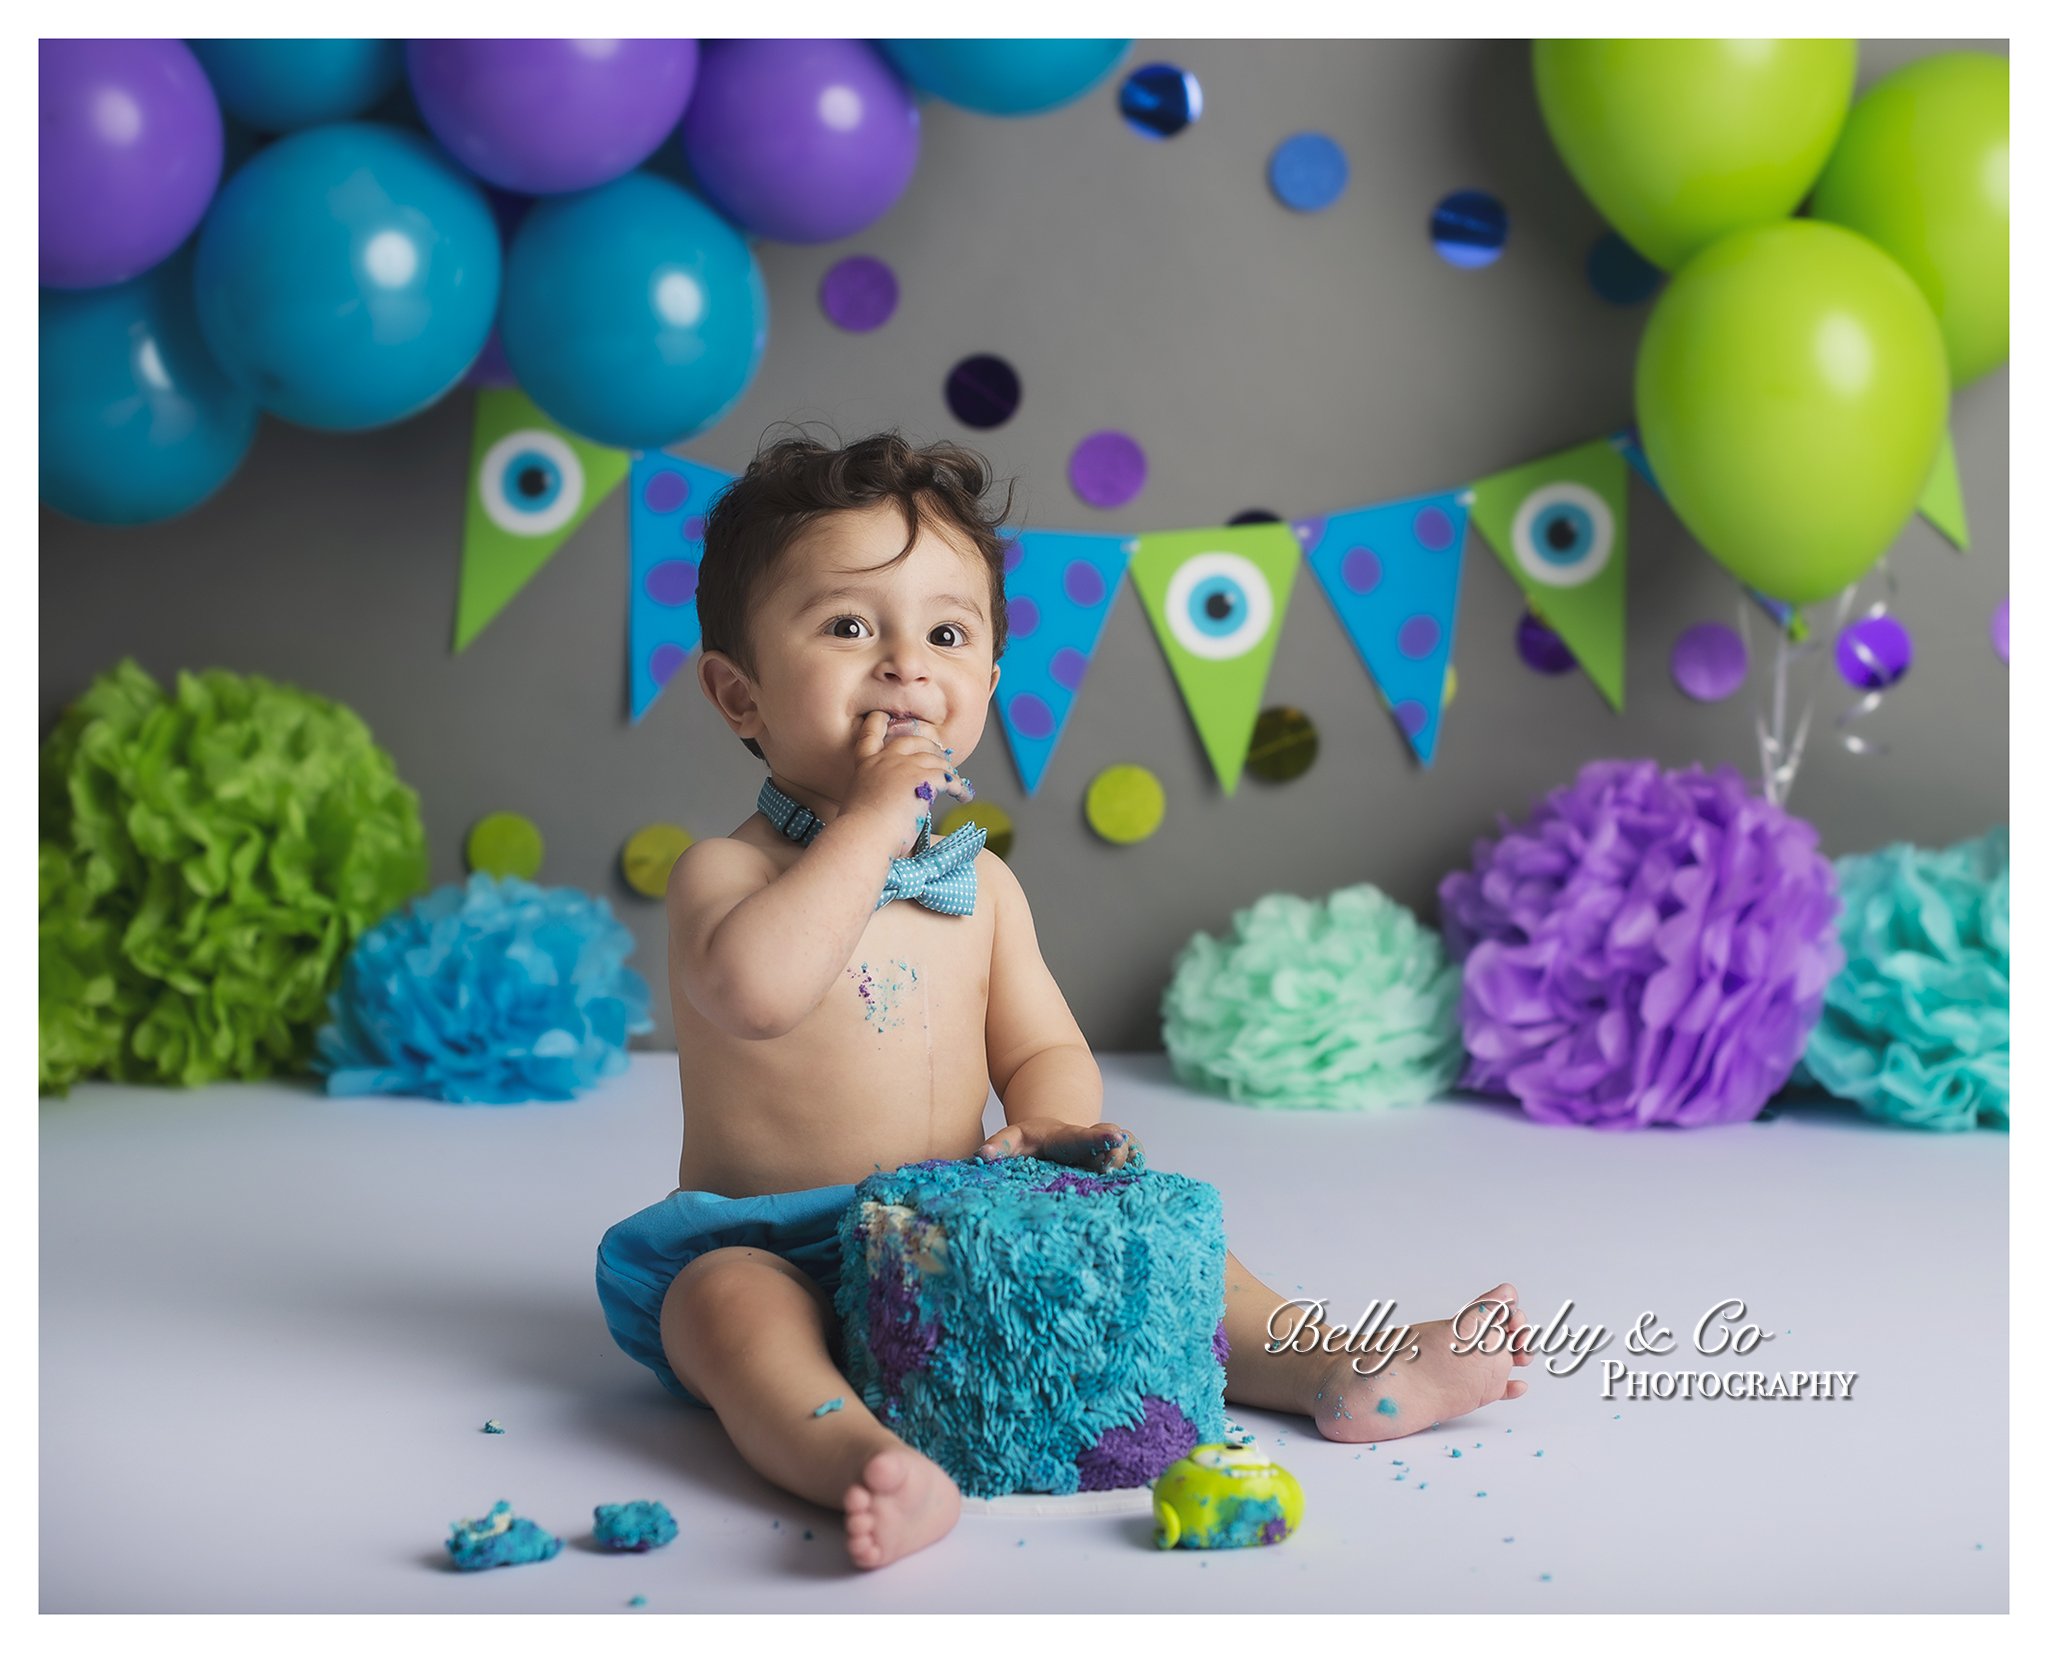 Belly Baby Co Photography 2 Top 10 Best Cake Smash Photographers in the World - 34